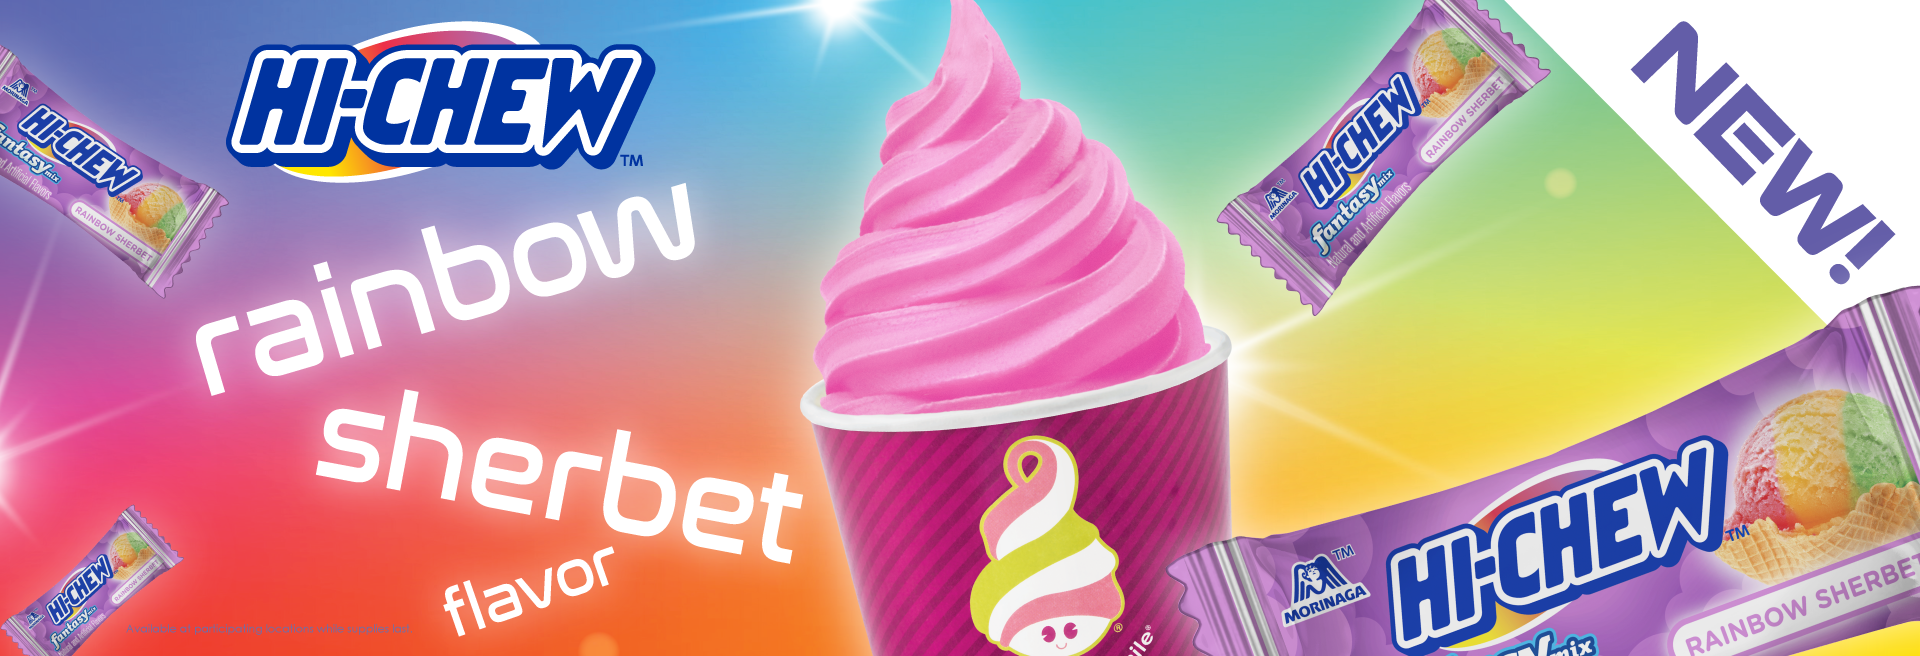 Celebrate National Candy month with HI-CHEW Rainbow Sherbet